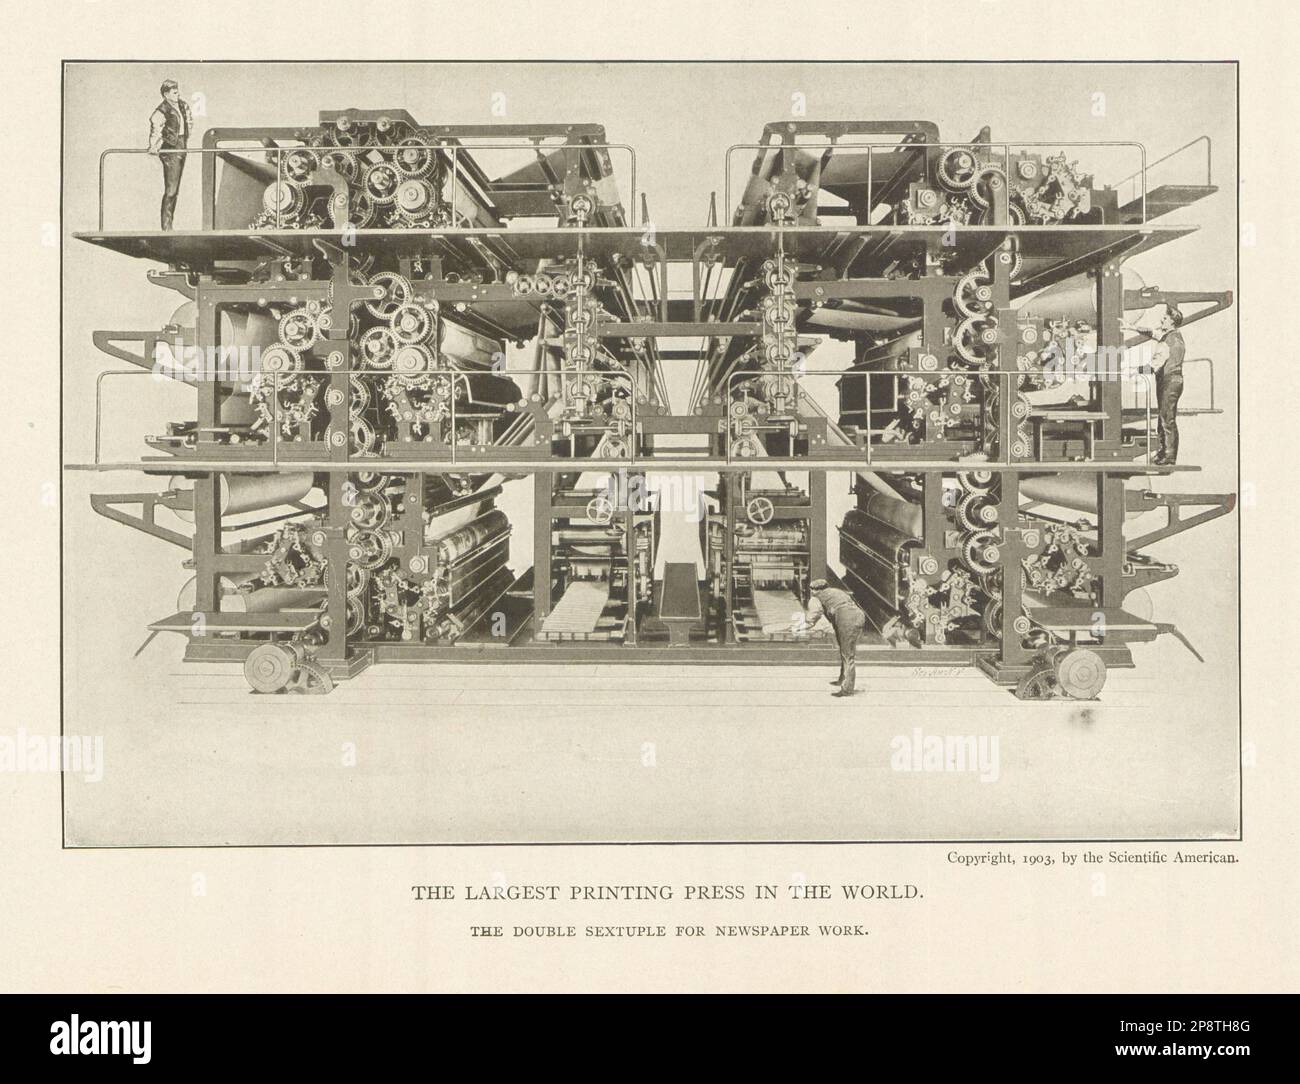 The Largest Printing Press In The World. Double Sextuple For Newspaper Work 1907 Stock Photo